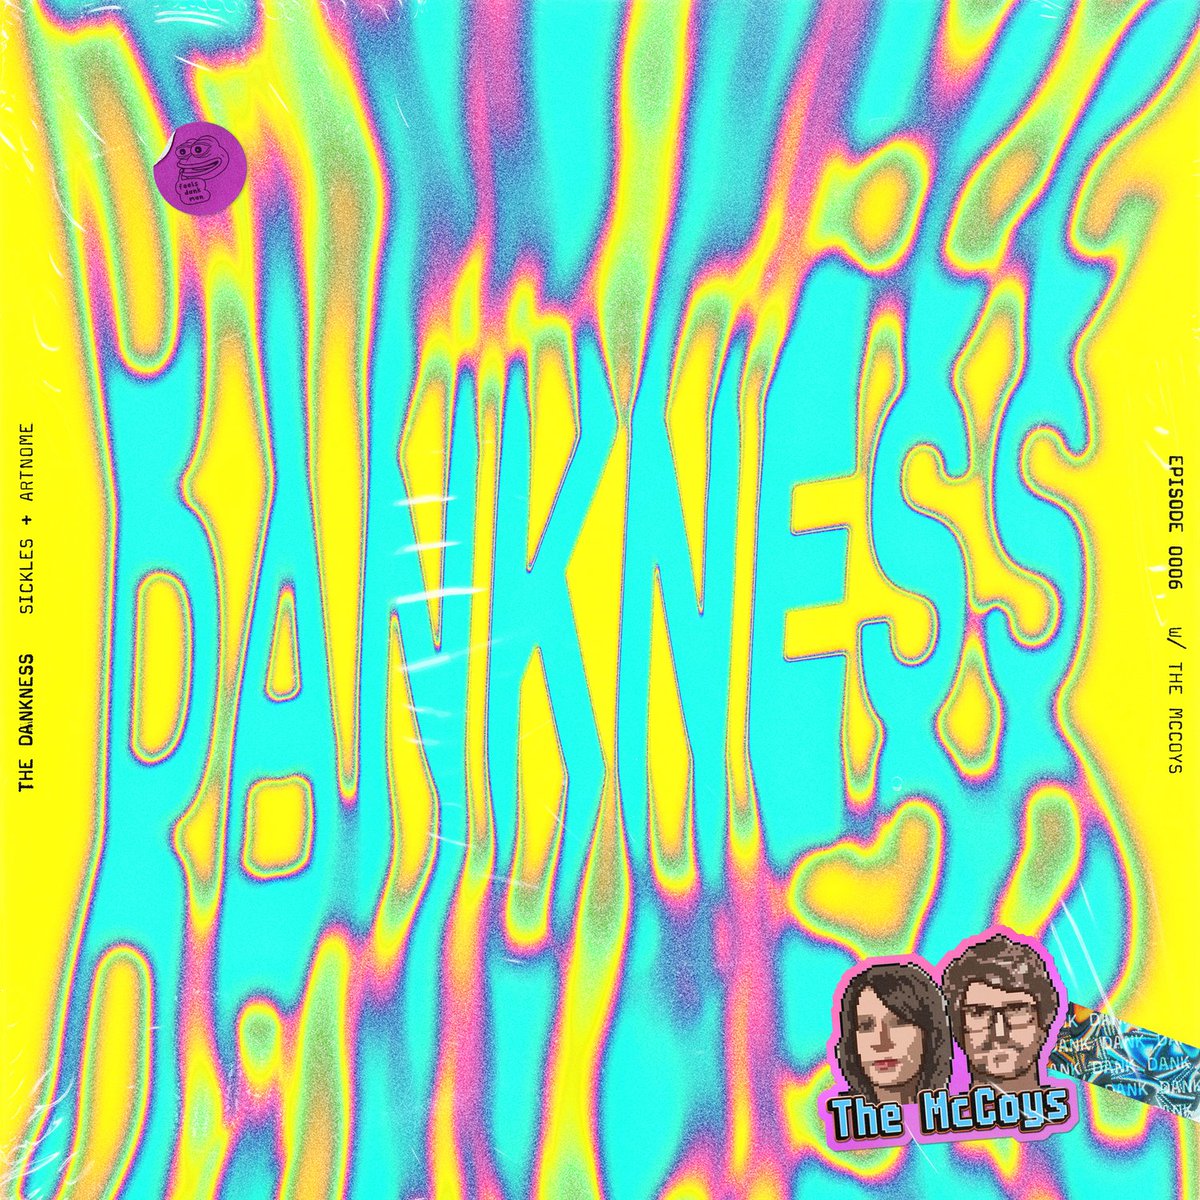 3/ ✅ FREE DANKTONE These psychedelic Danktones are only available at @AsyncArt for a limited time, AND it's a historic one with @JennMcCoySpace & @mccoyspace! @artnome & @dan_sickles interview them on @thedanknessxyz! MINT AWAY at thedankness.xyz